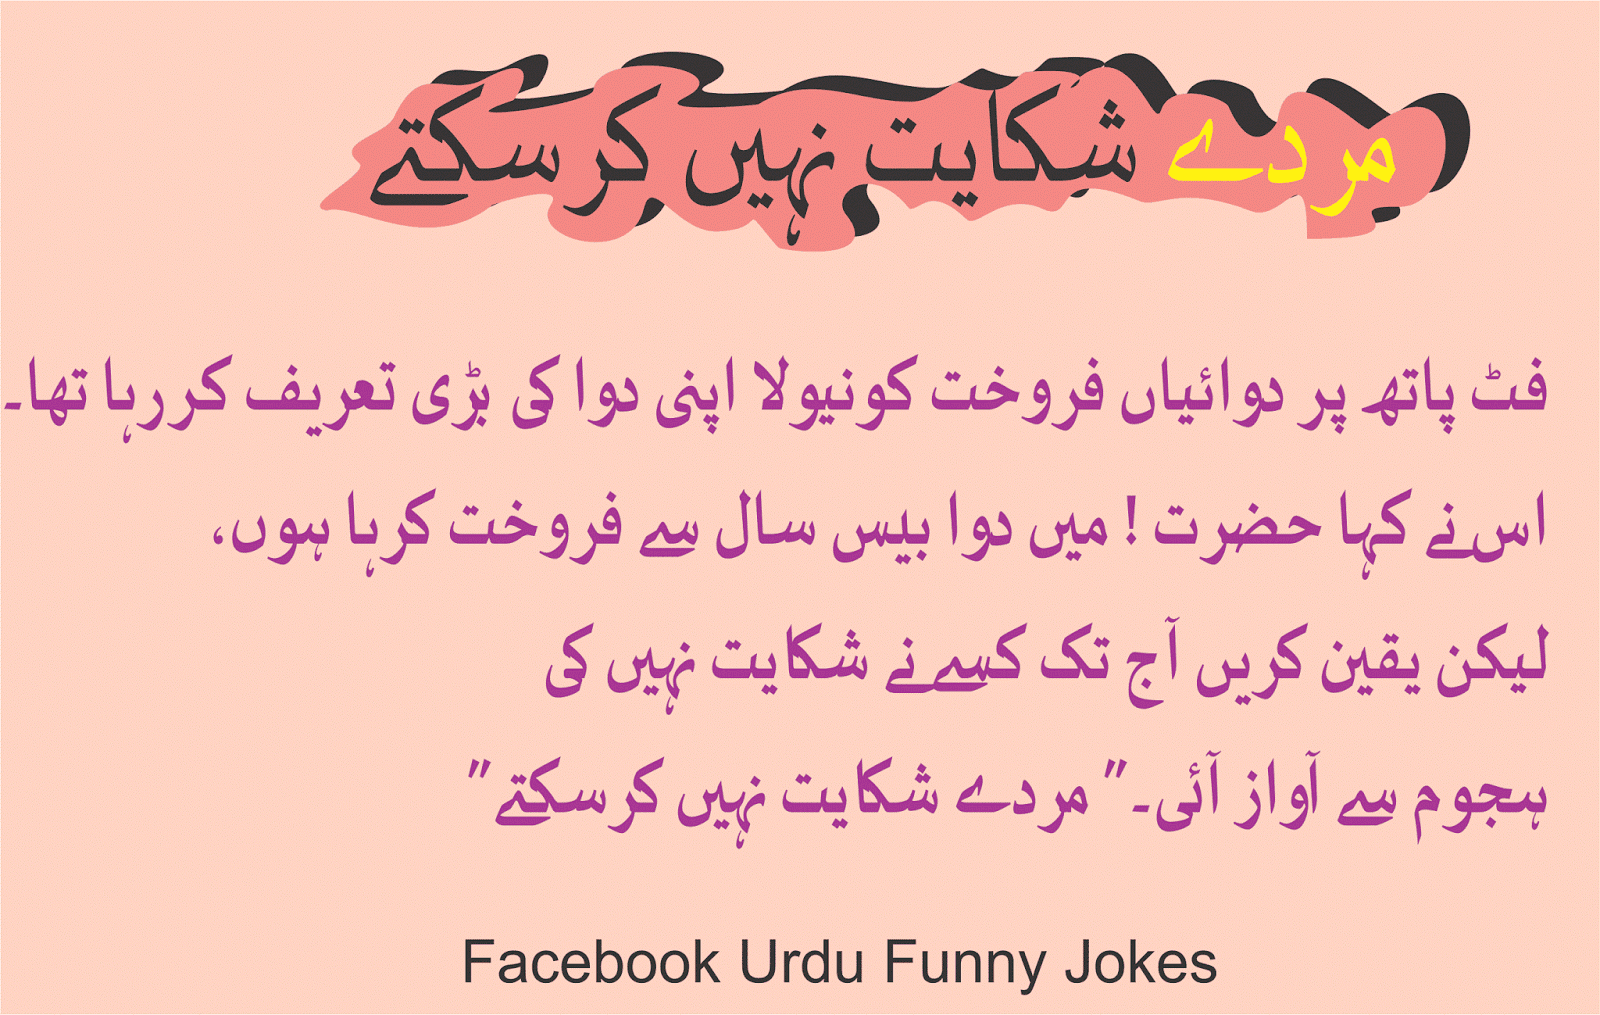 of urdu funny jokes and sms in urdu best fonts, in this course we are going...